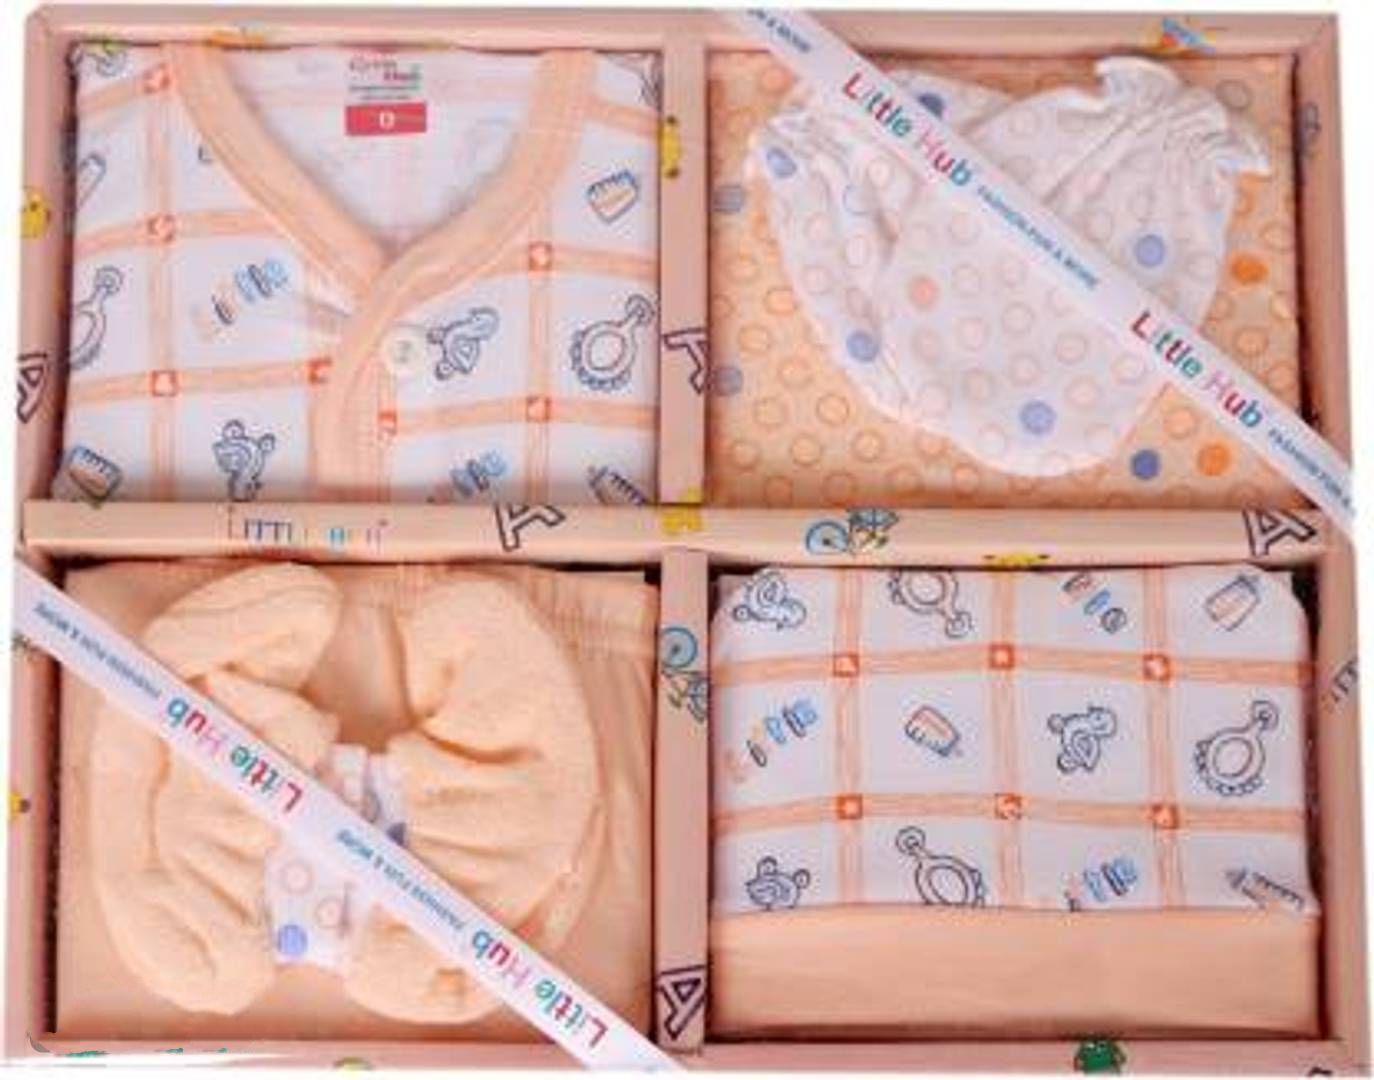 Buy LITTLE HUB BORN BABY GIFT SET( 0- 6 MONTHS) Online @ ₹299 from ShopClues